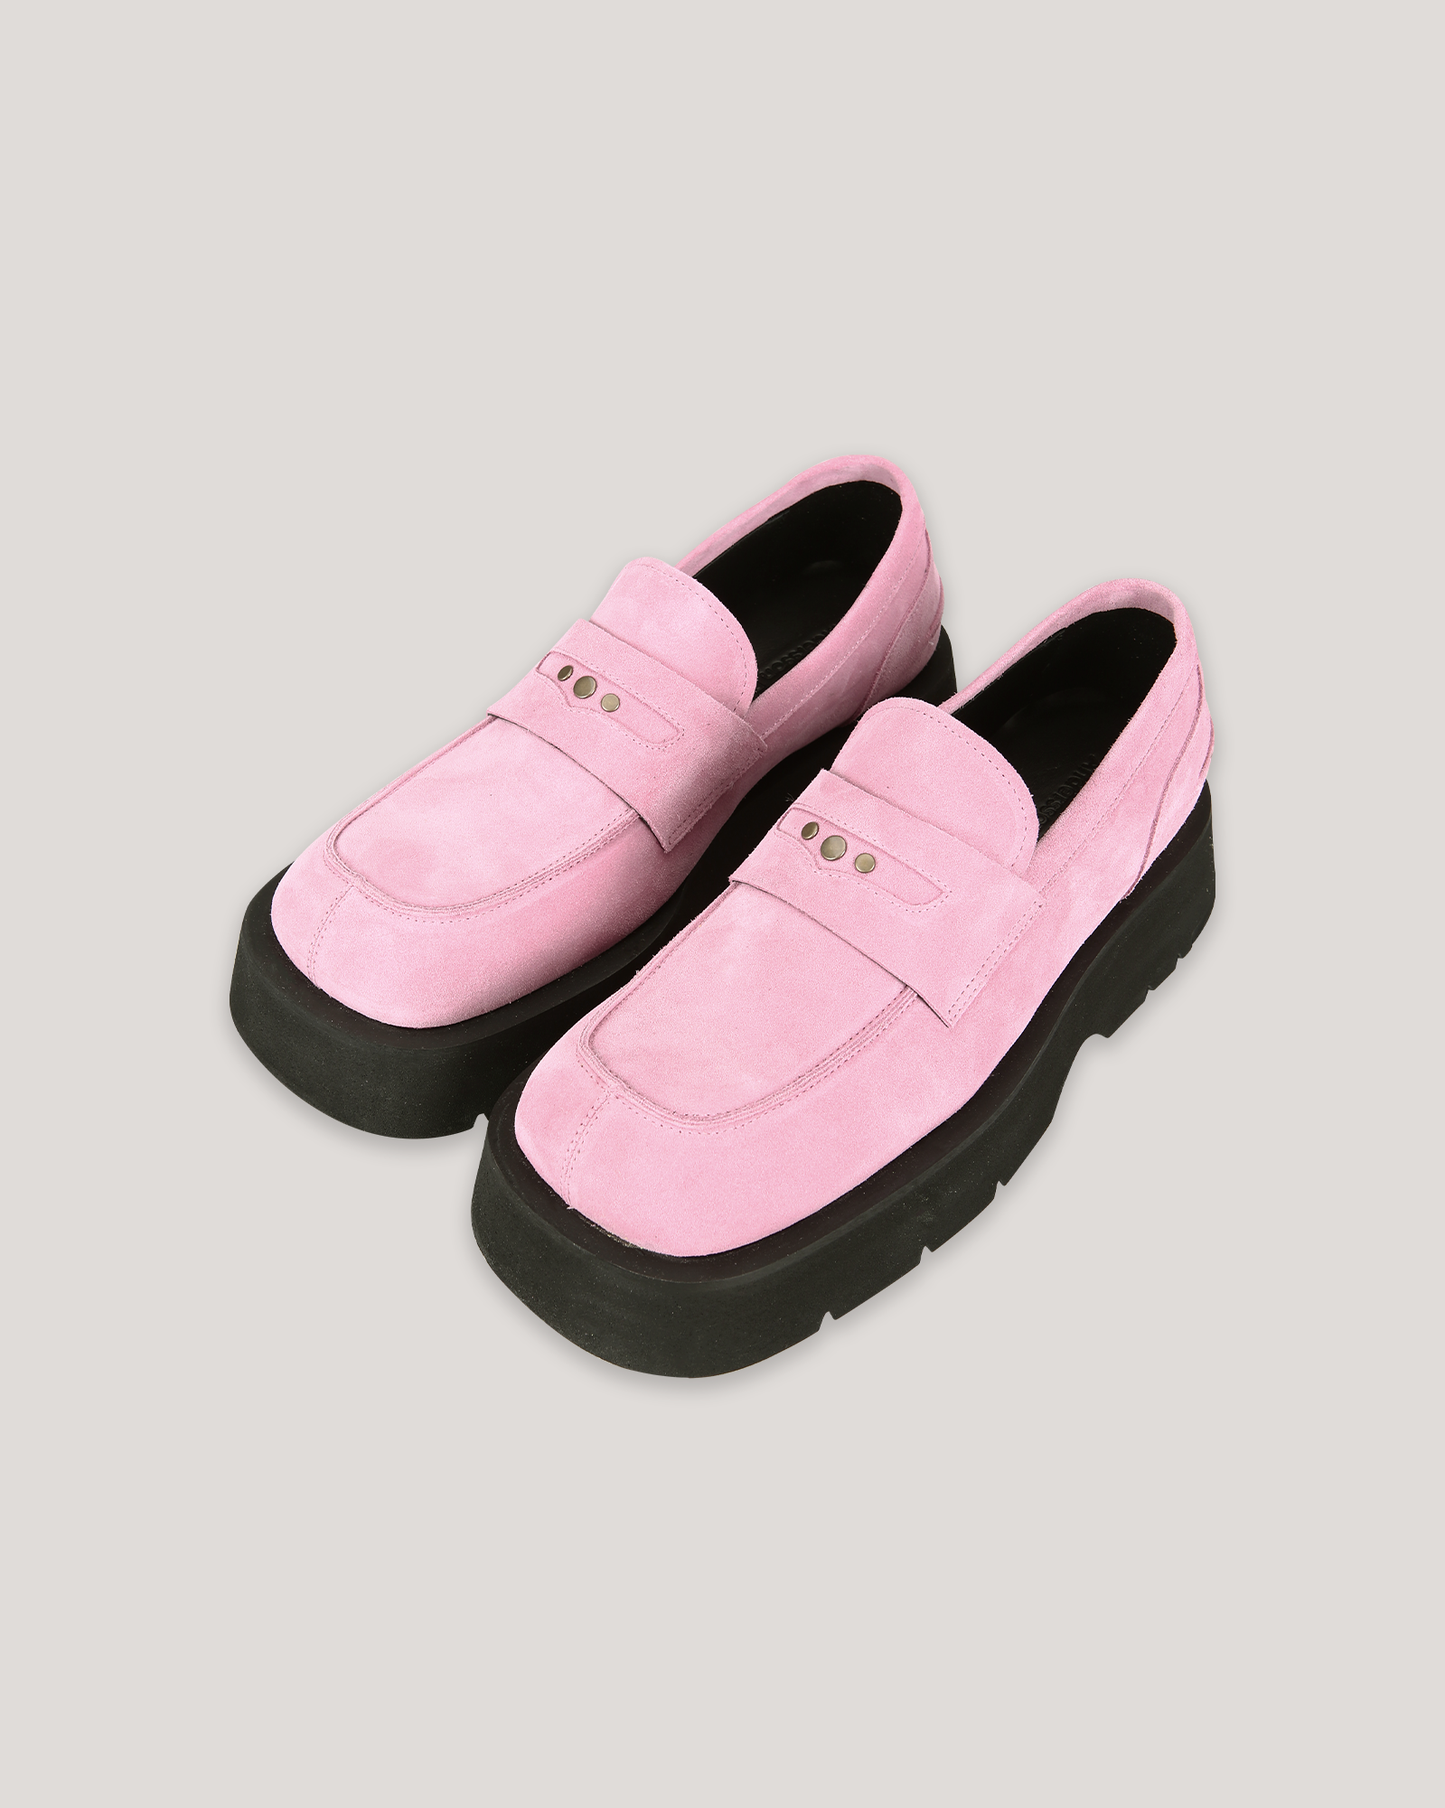 ANDERSSON BELL BROEILS PENNY LOAFER IN PINK